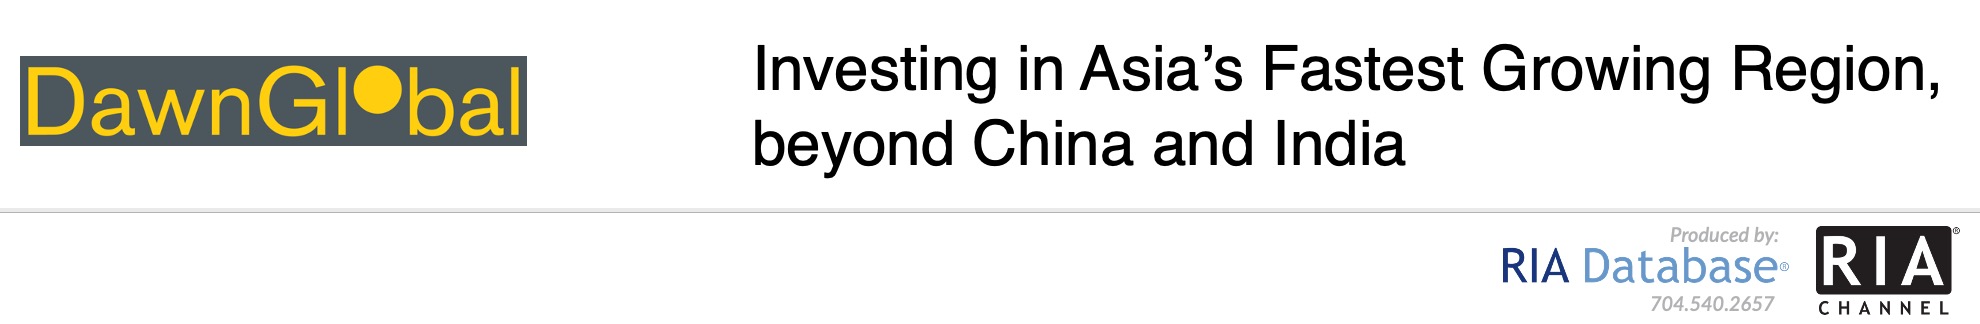 Investing in Asia’s fastest growing region, beyond China and India